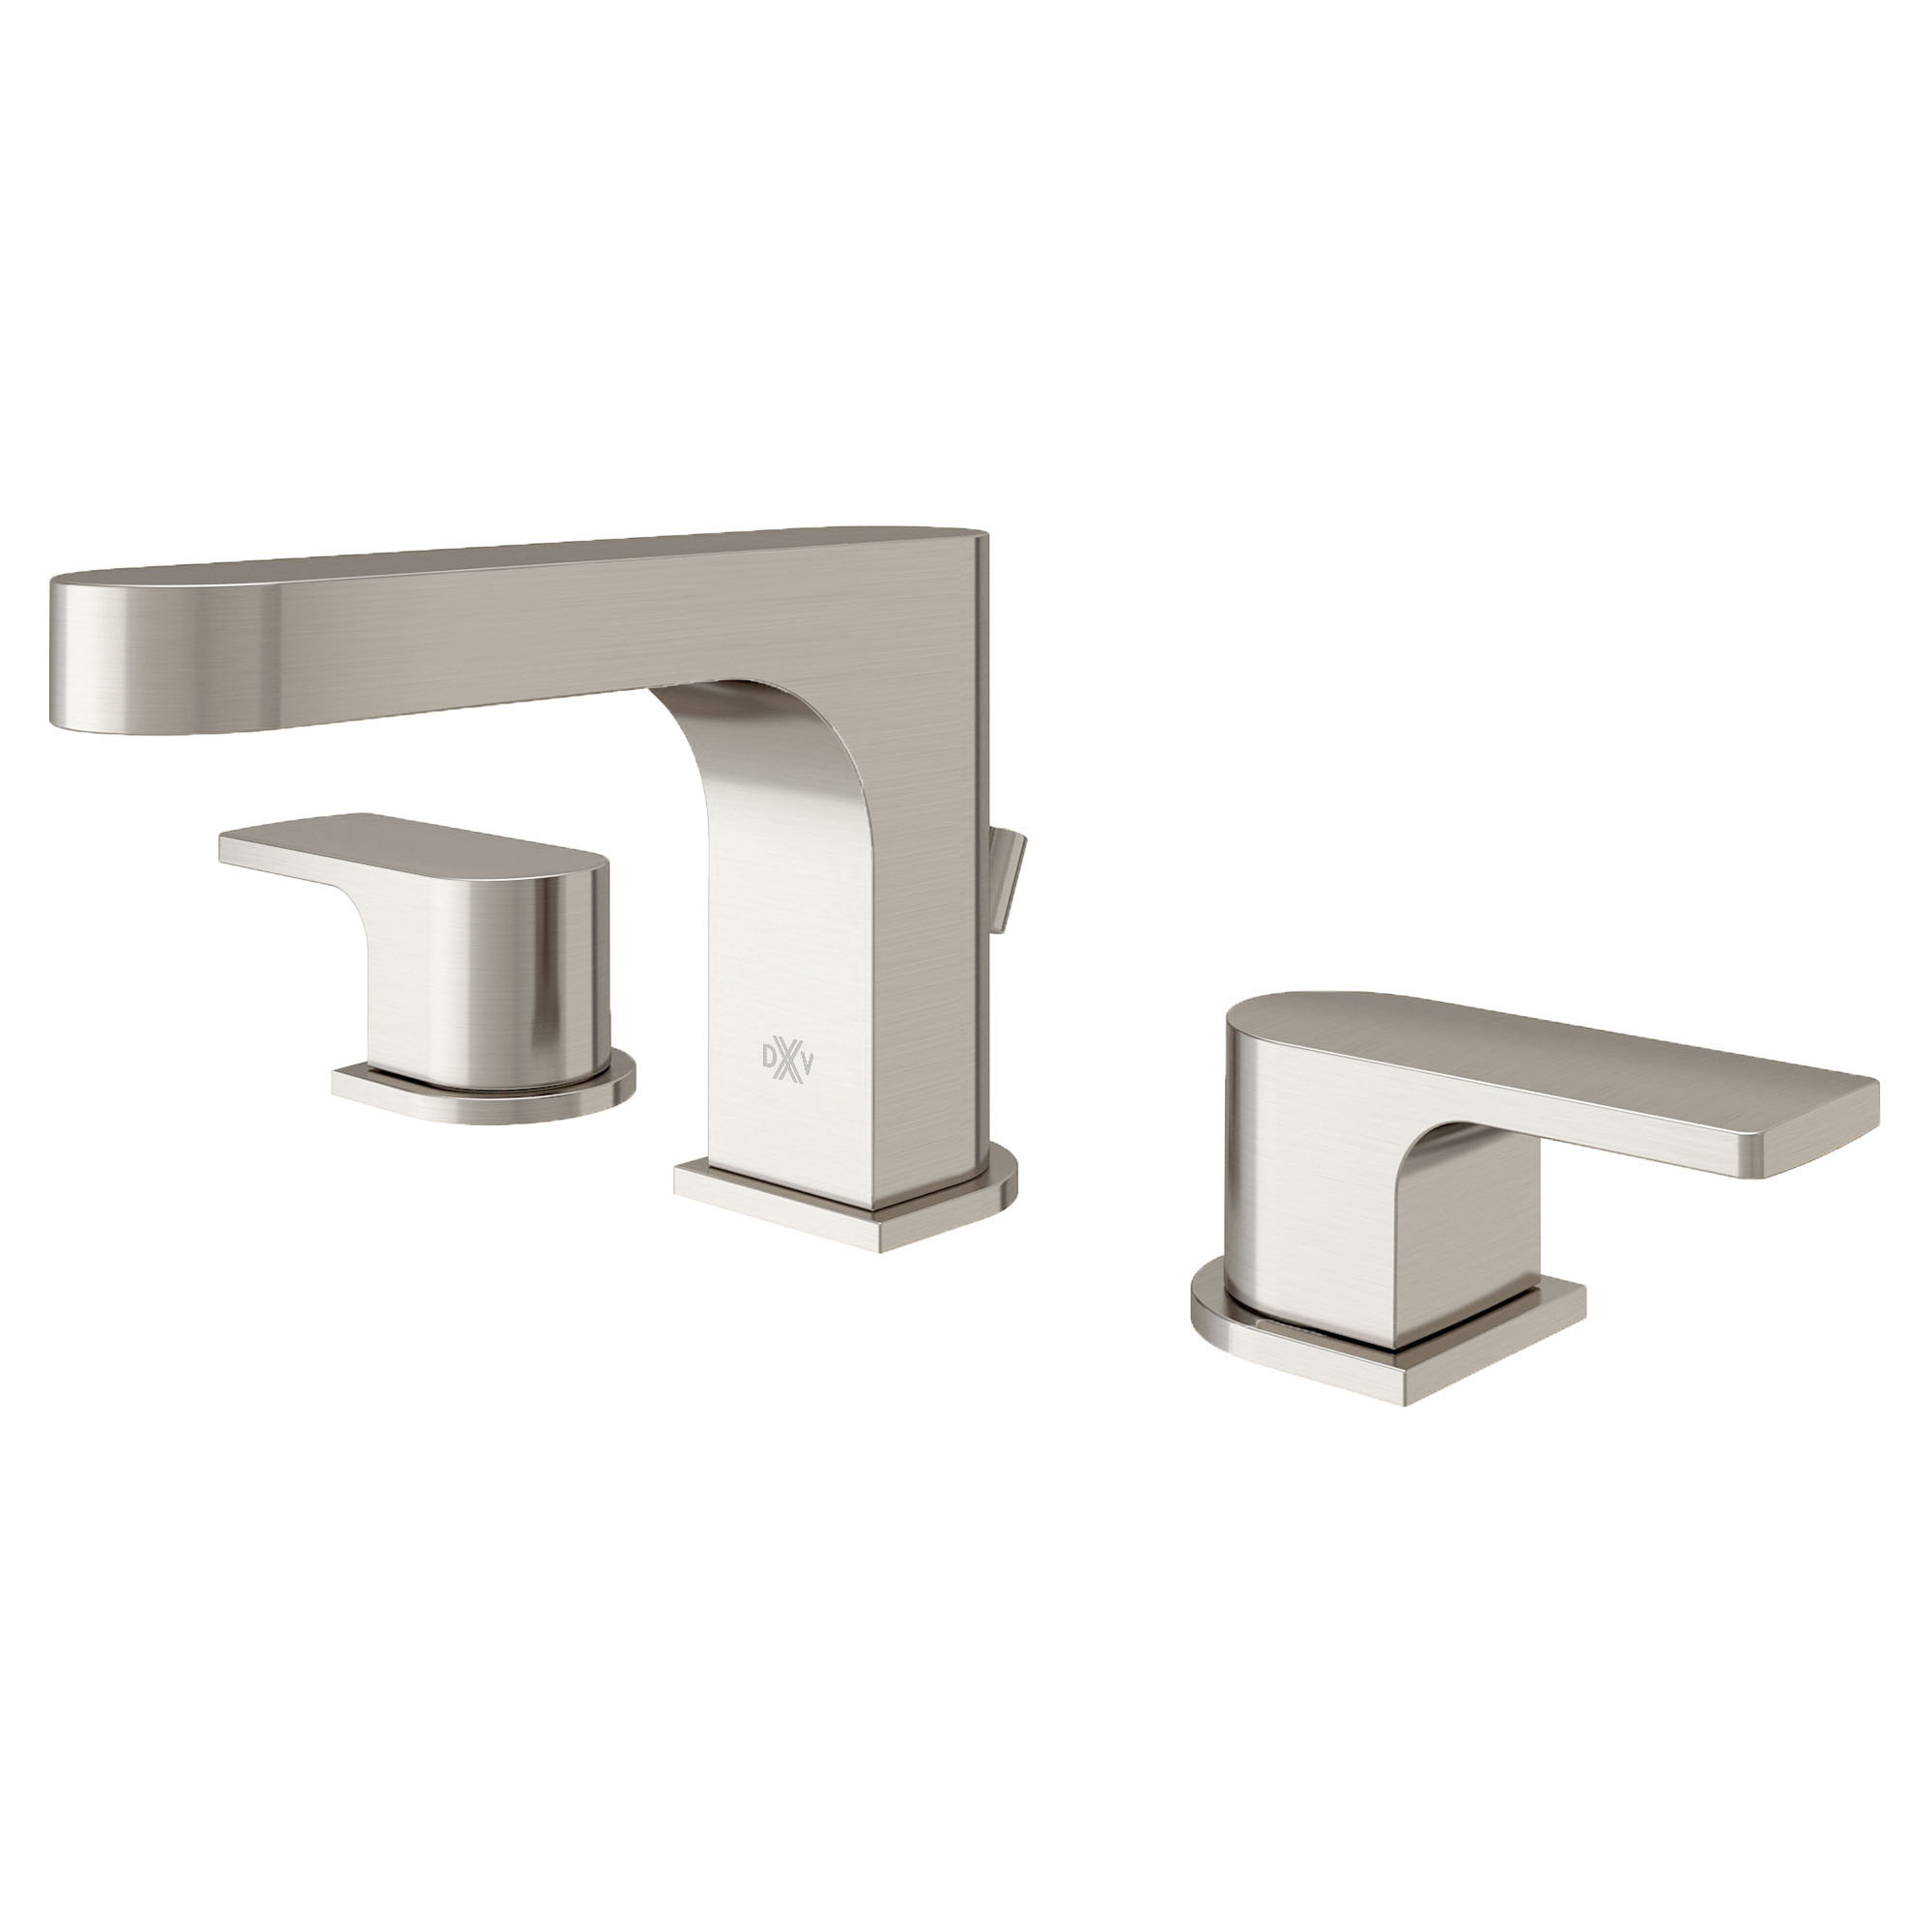 Equility 2-Handle Widespread Bathroom Faucet with Lever Handles